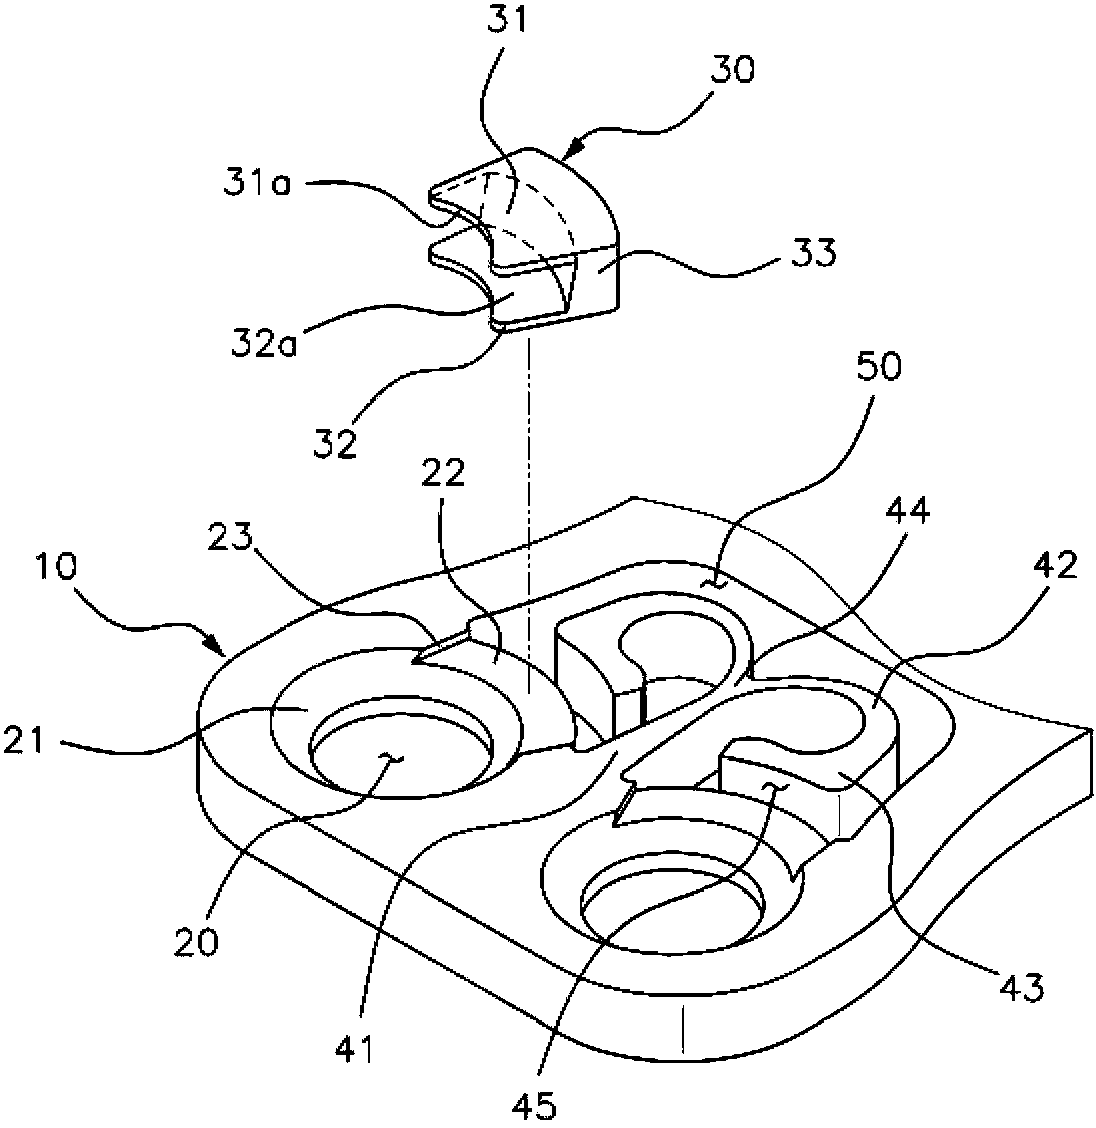 Apparatus for fixing a cervical spine having self tension part